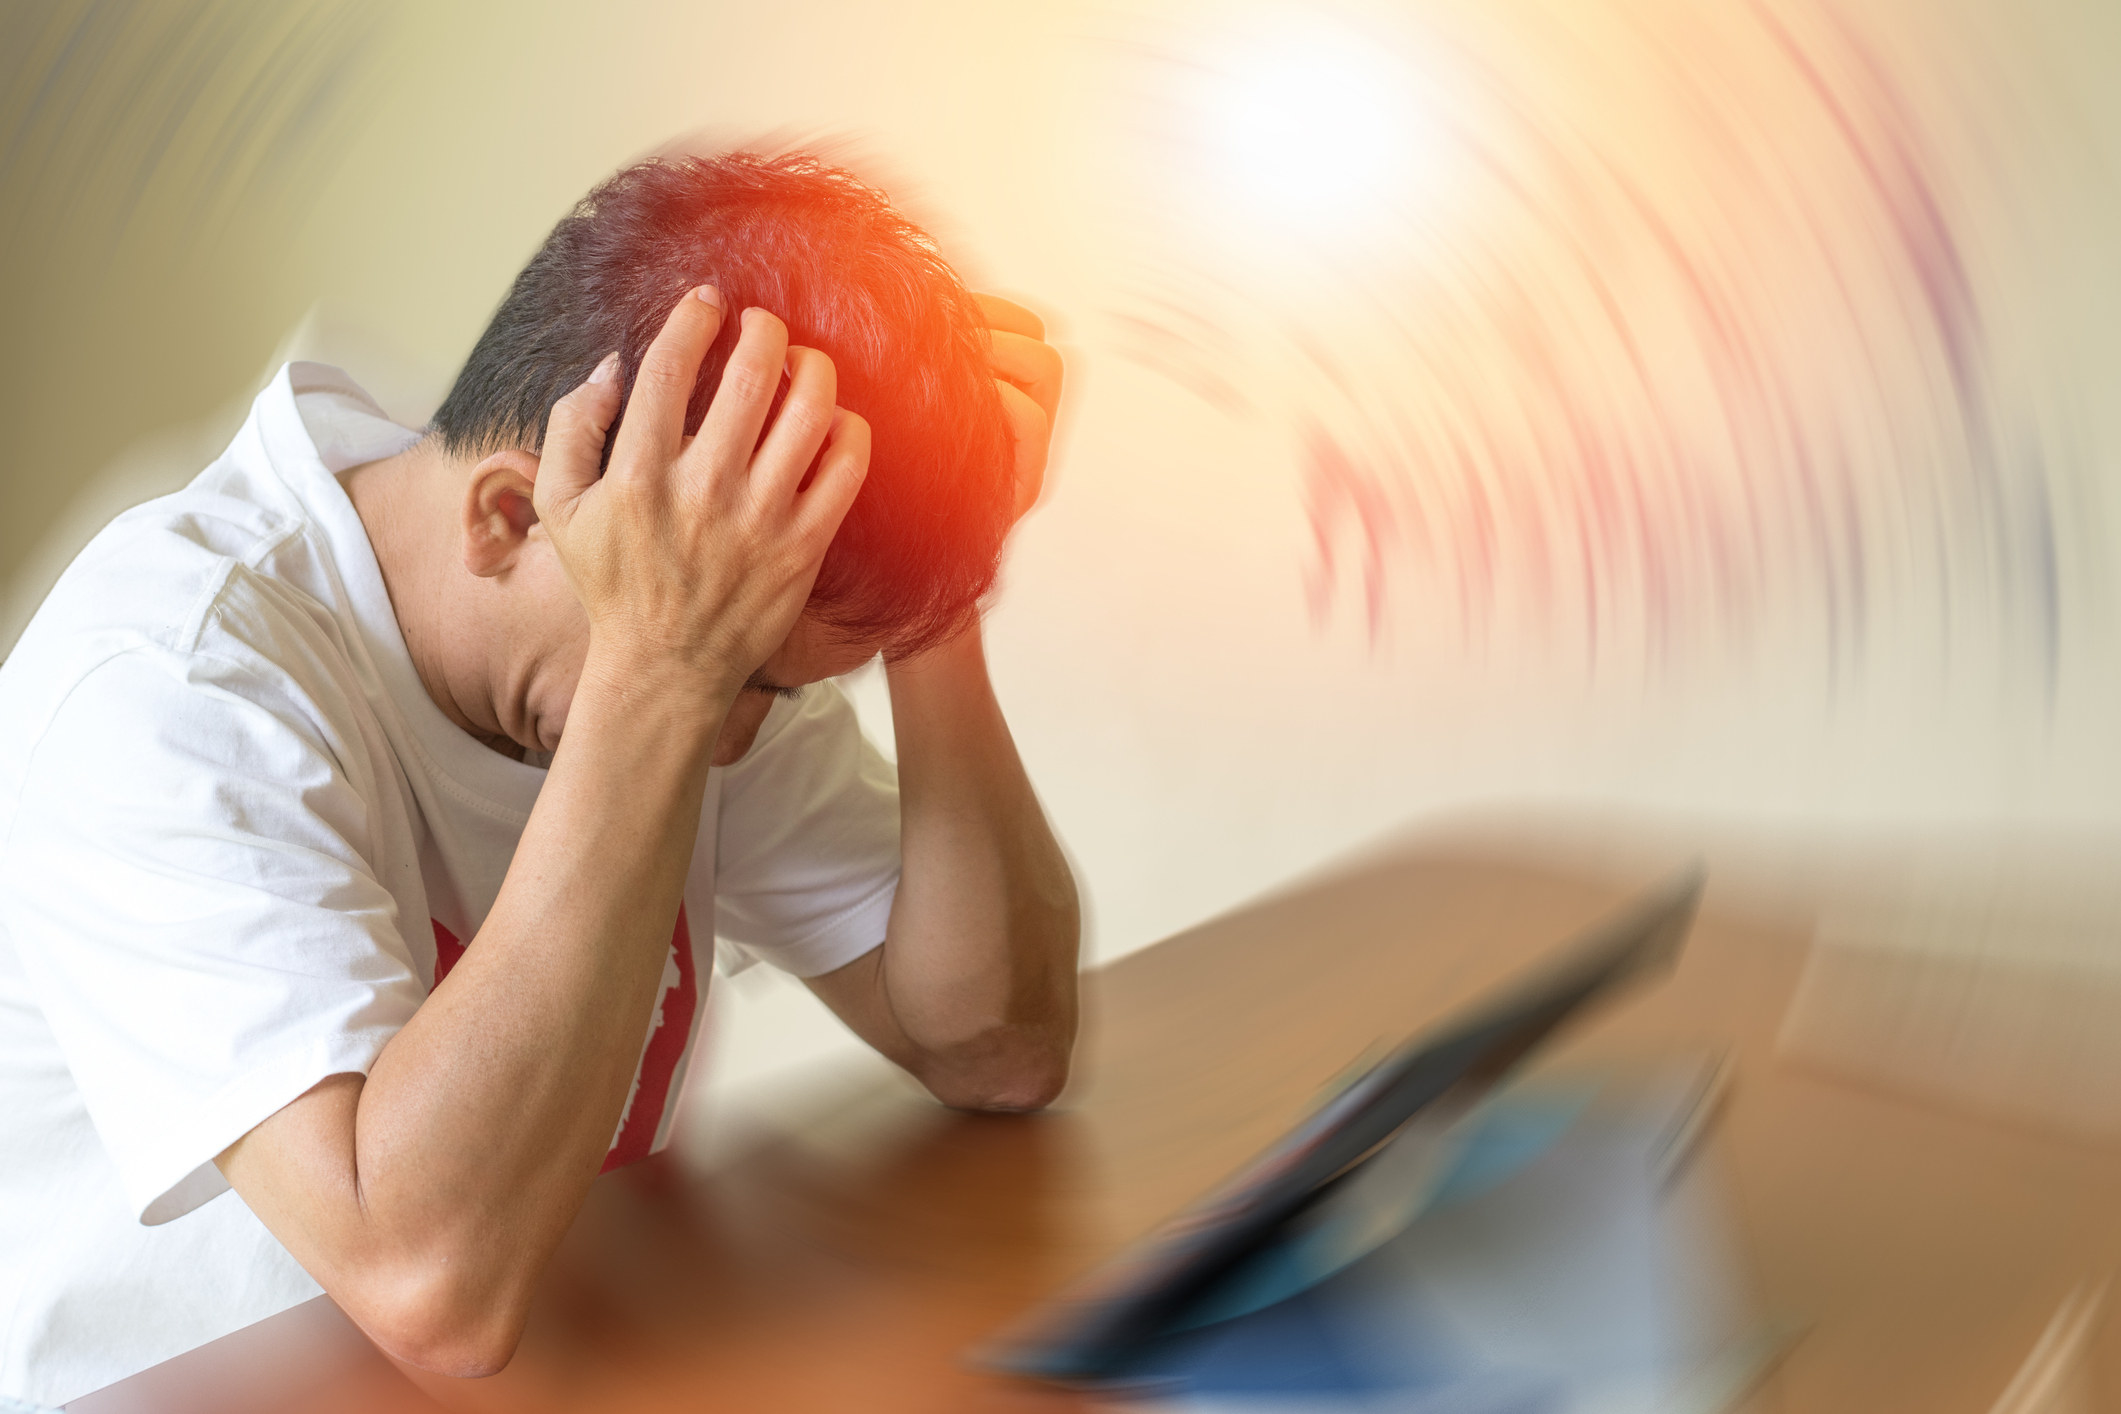 Person appearing to be in pain  clutching their head